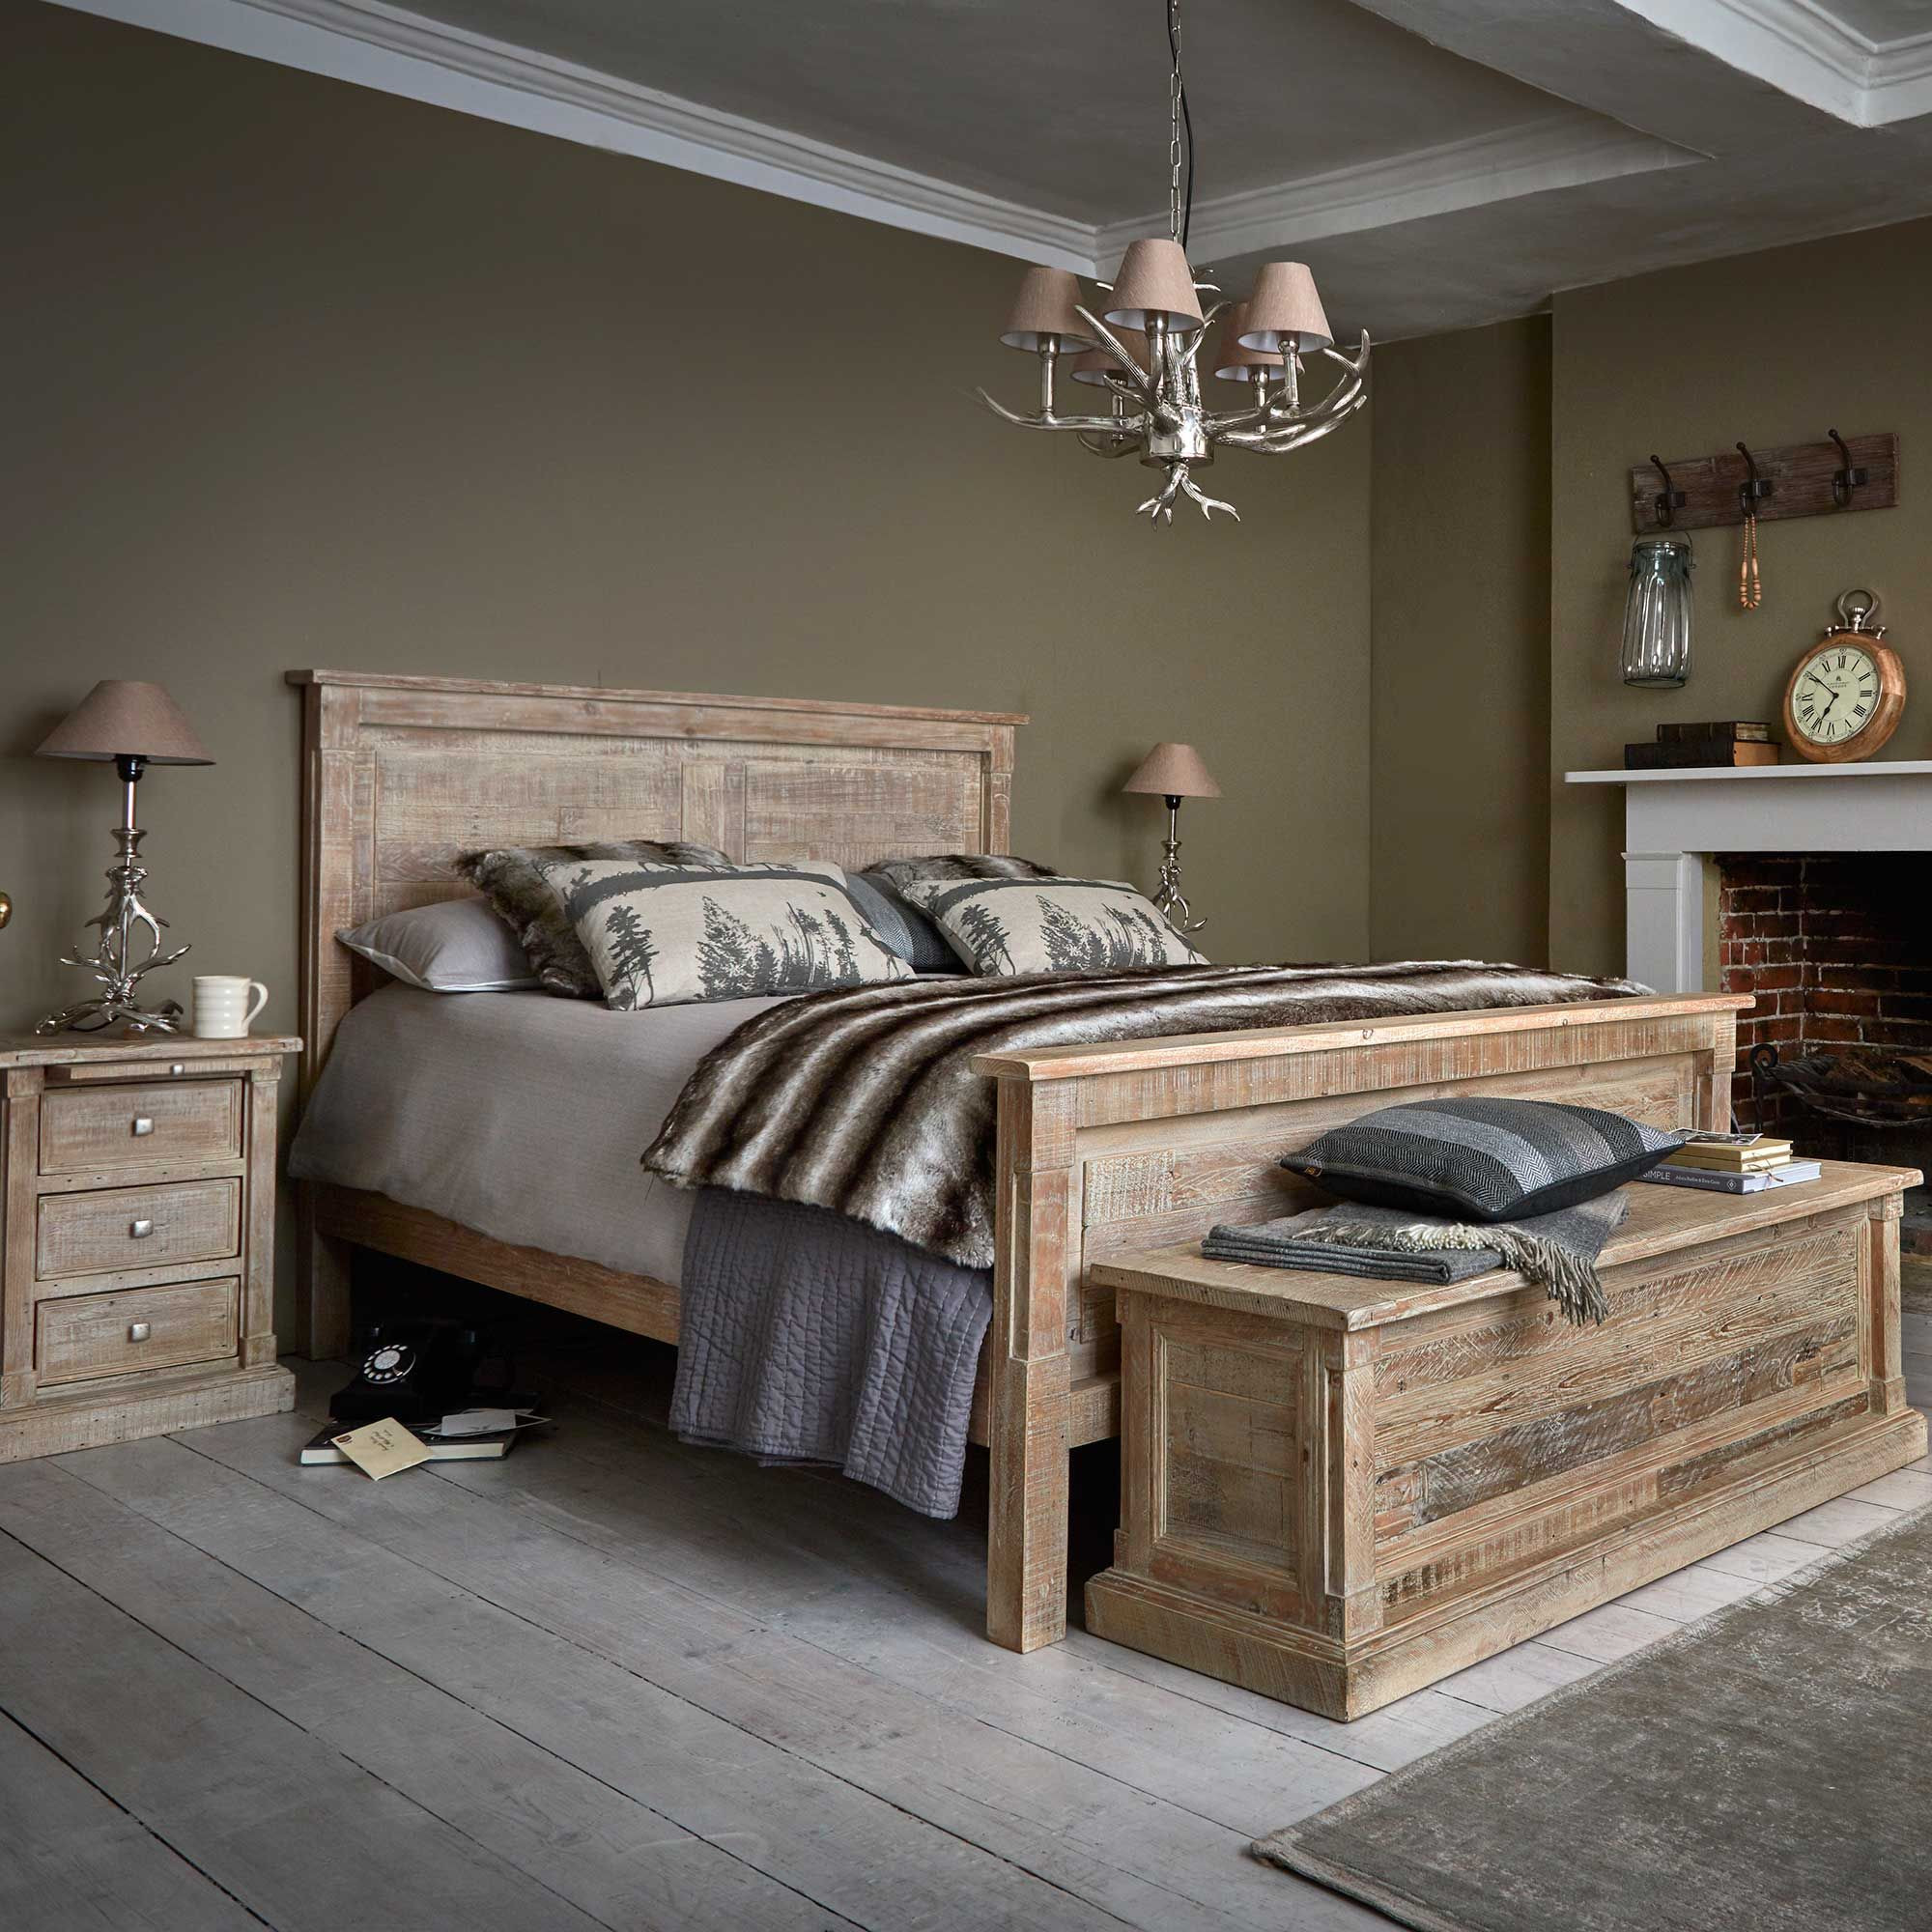 Rustic White Bedroom Set
 The Austen Bed Frame is made from reclaimed wood with a